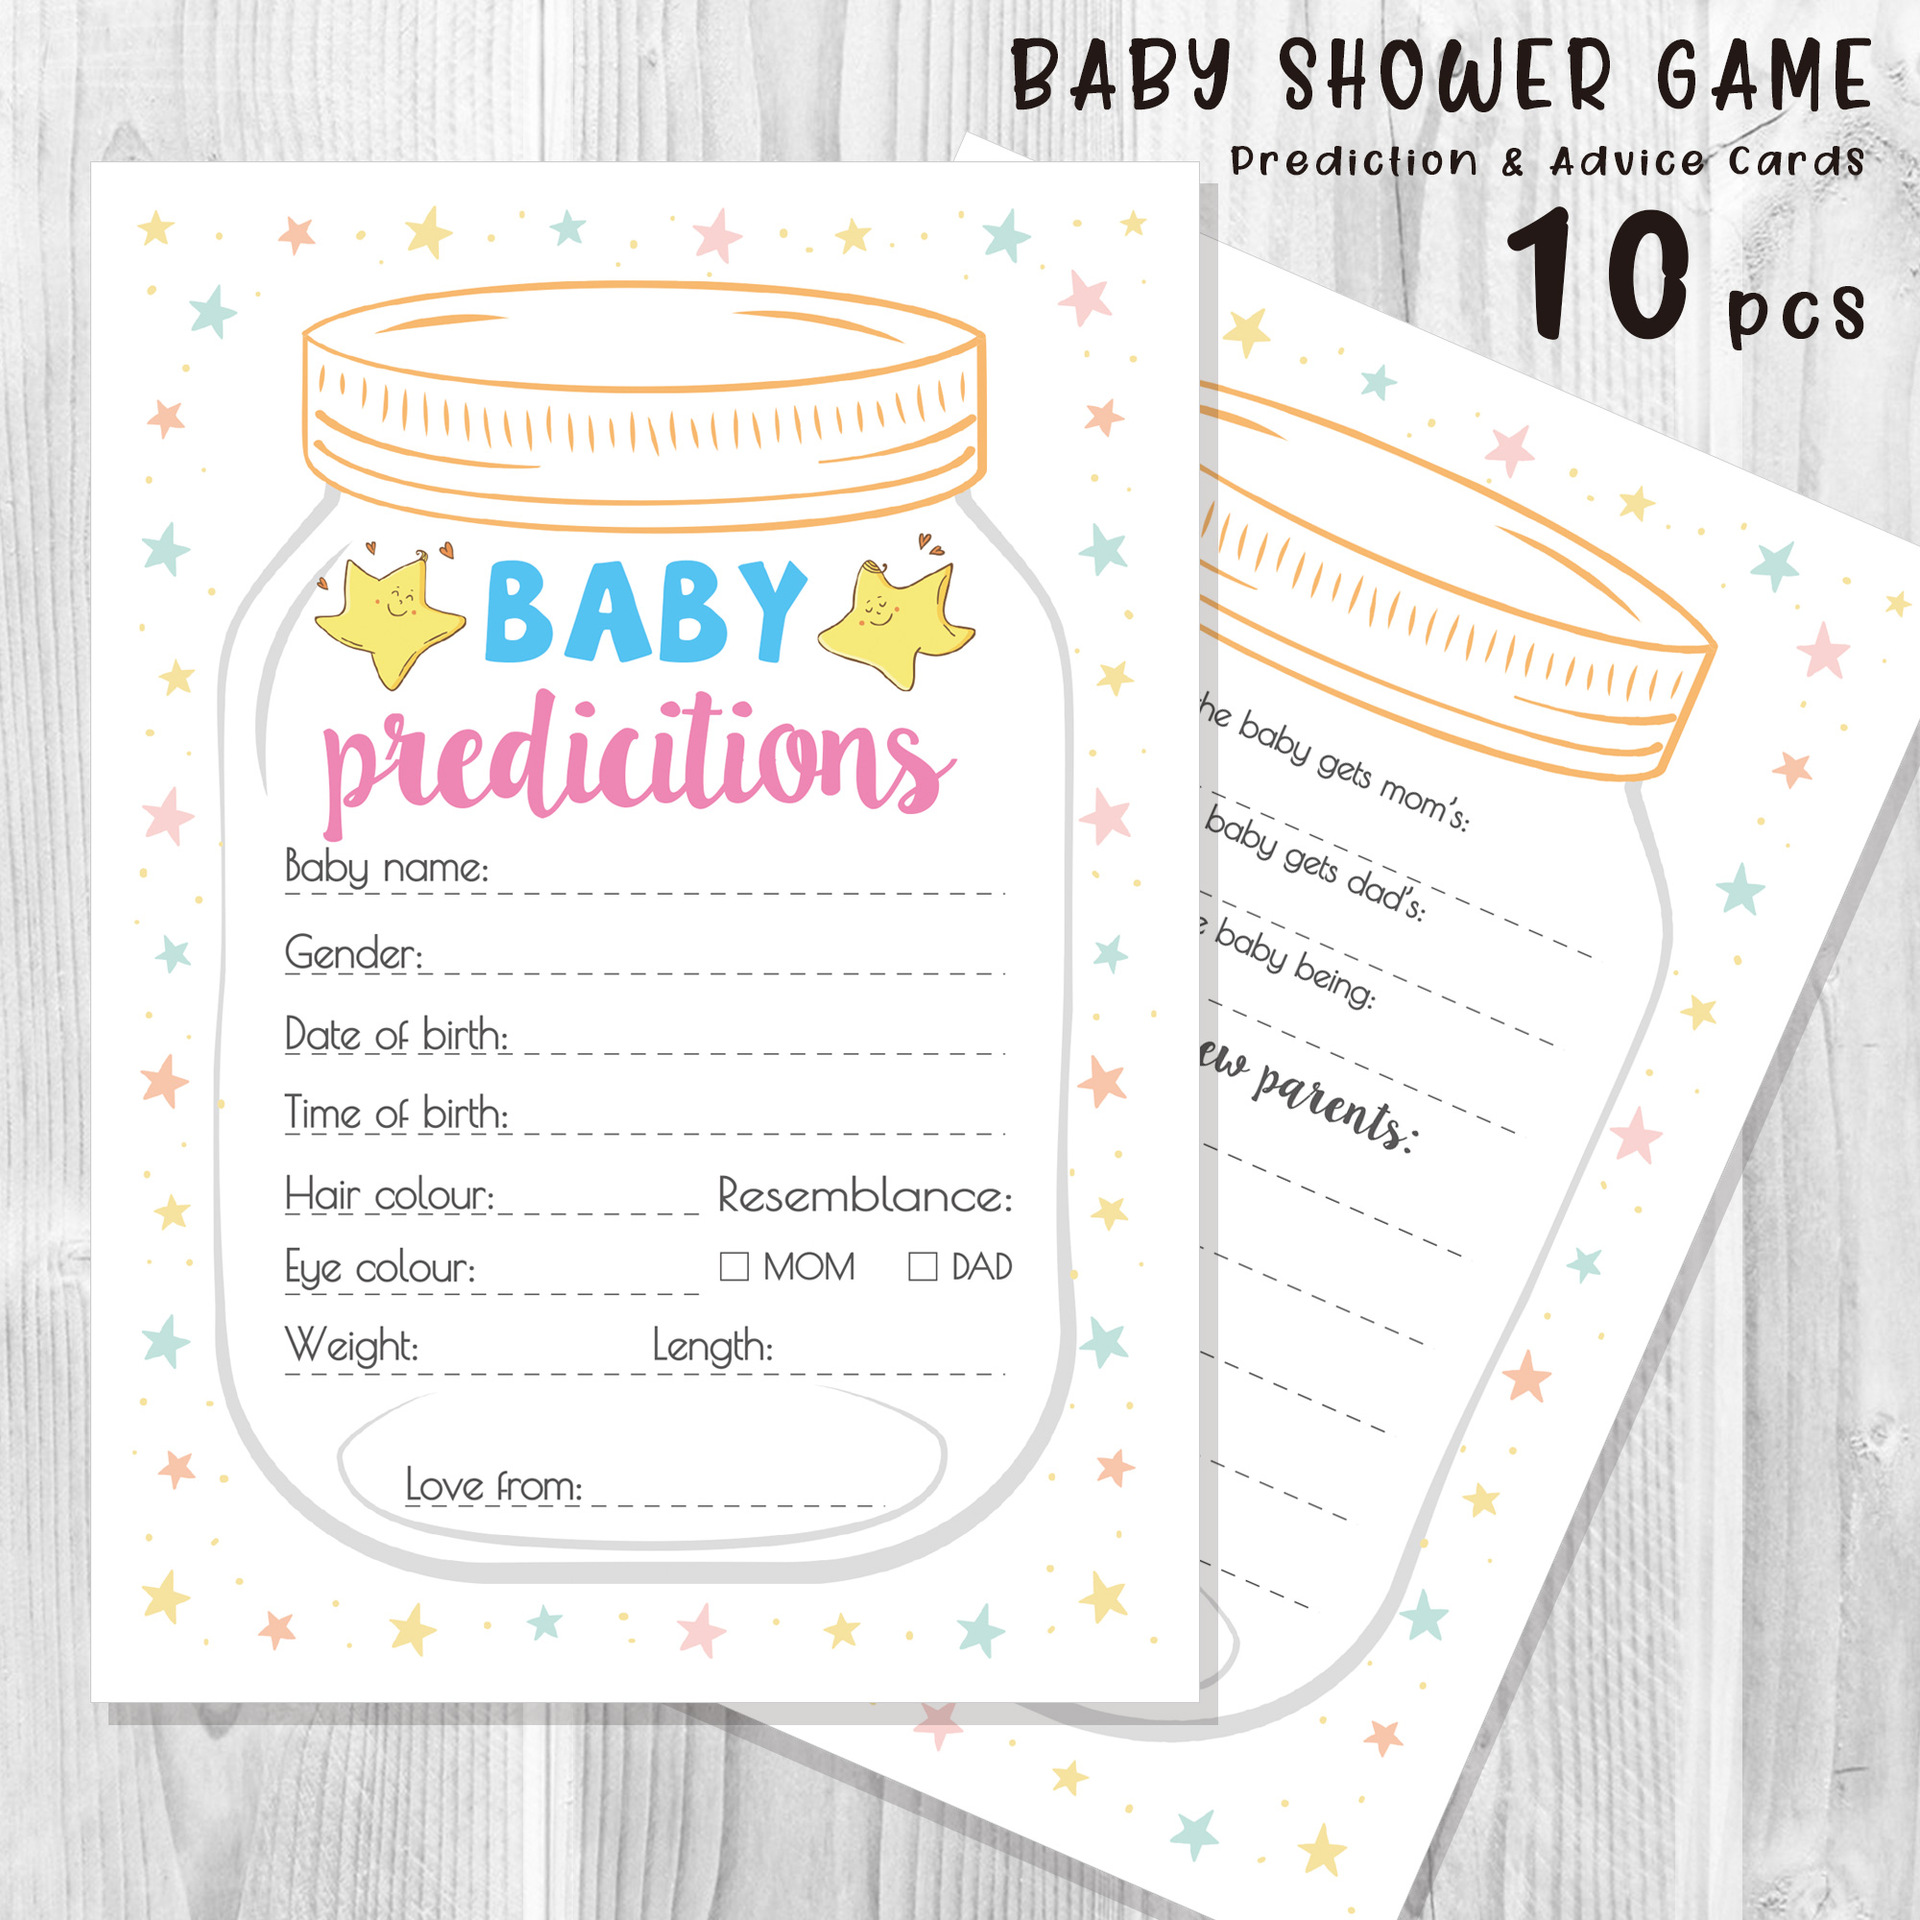 Baby Shower Star Predicitions And Advice Card Pack of 10